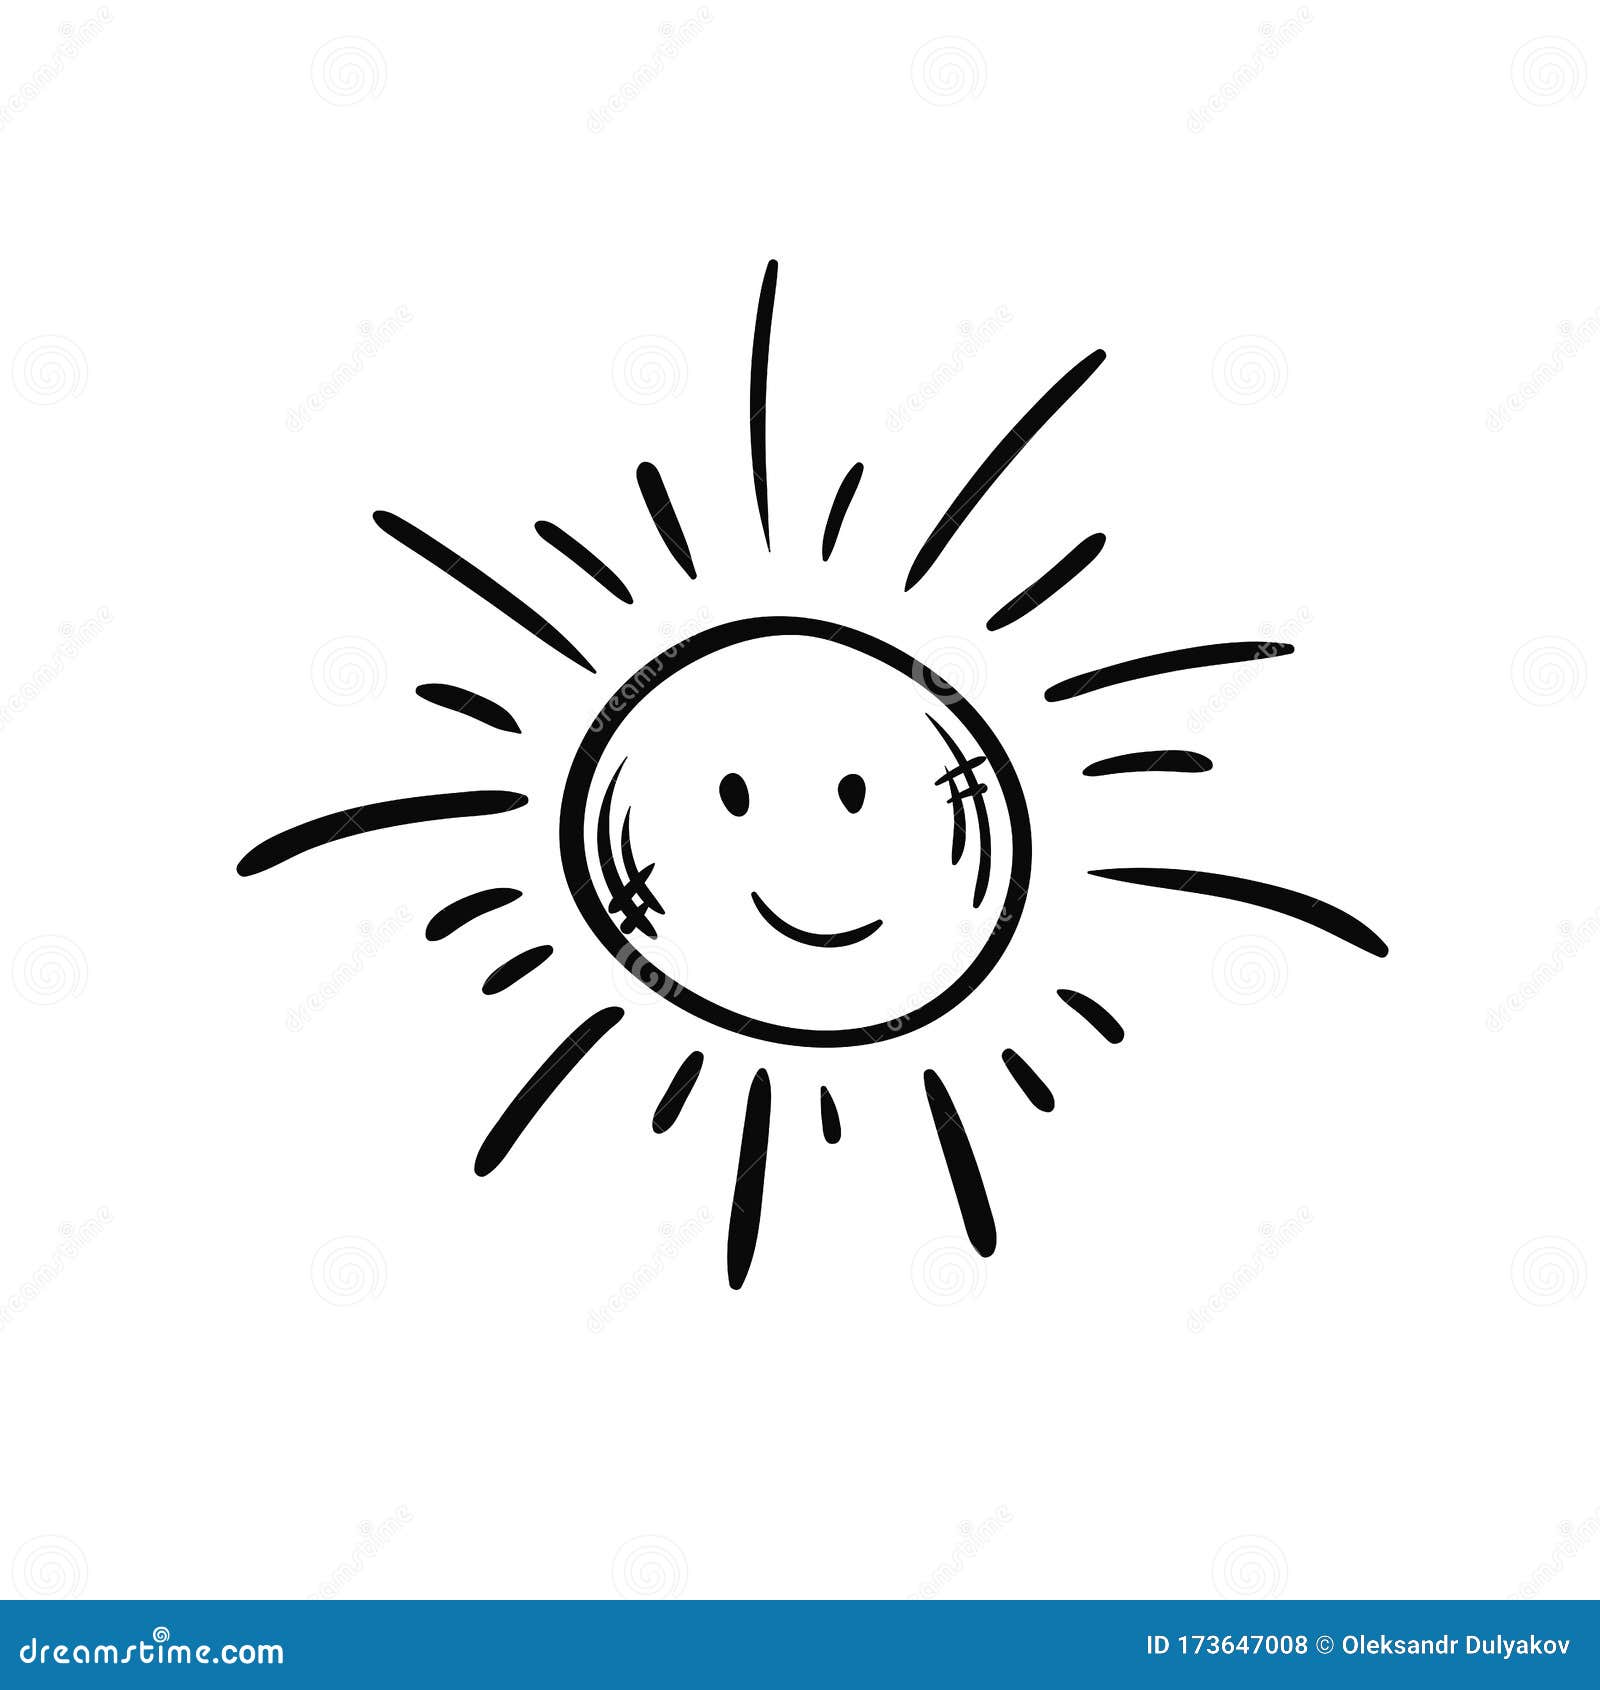 Cute Cartoon Hand Drawn Doodle Sun. Sweet Vector Black and White Sun  Drawing Stock Vector - Illustration of object, print: 173647008